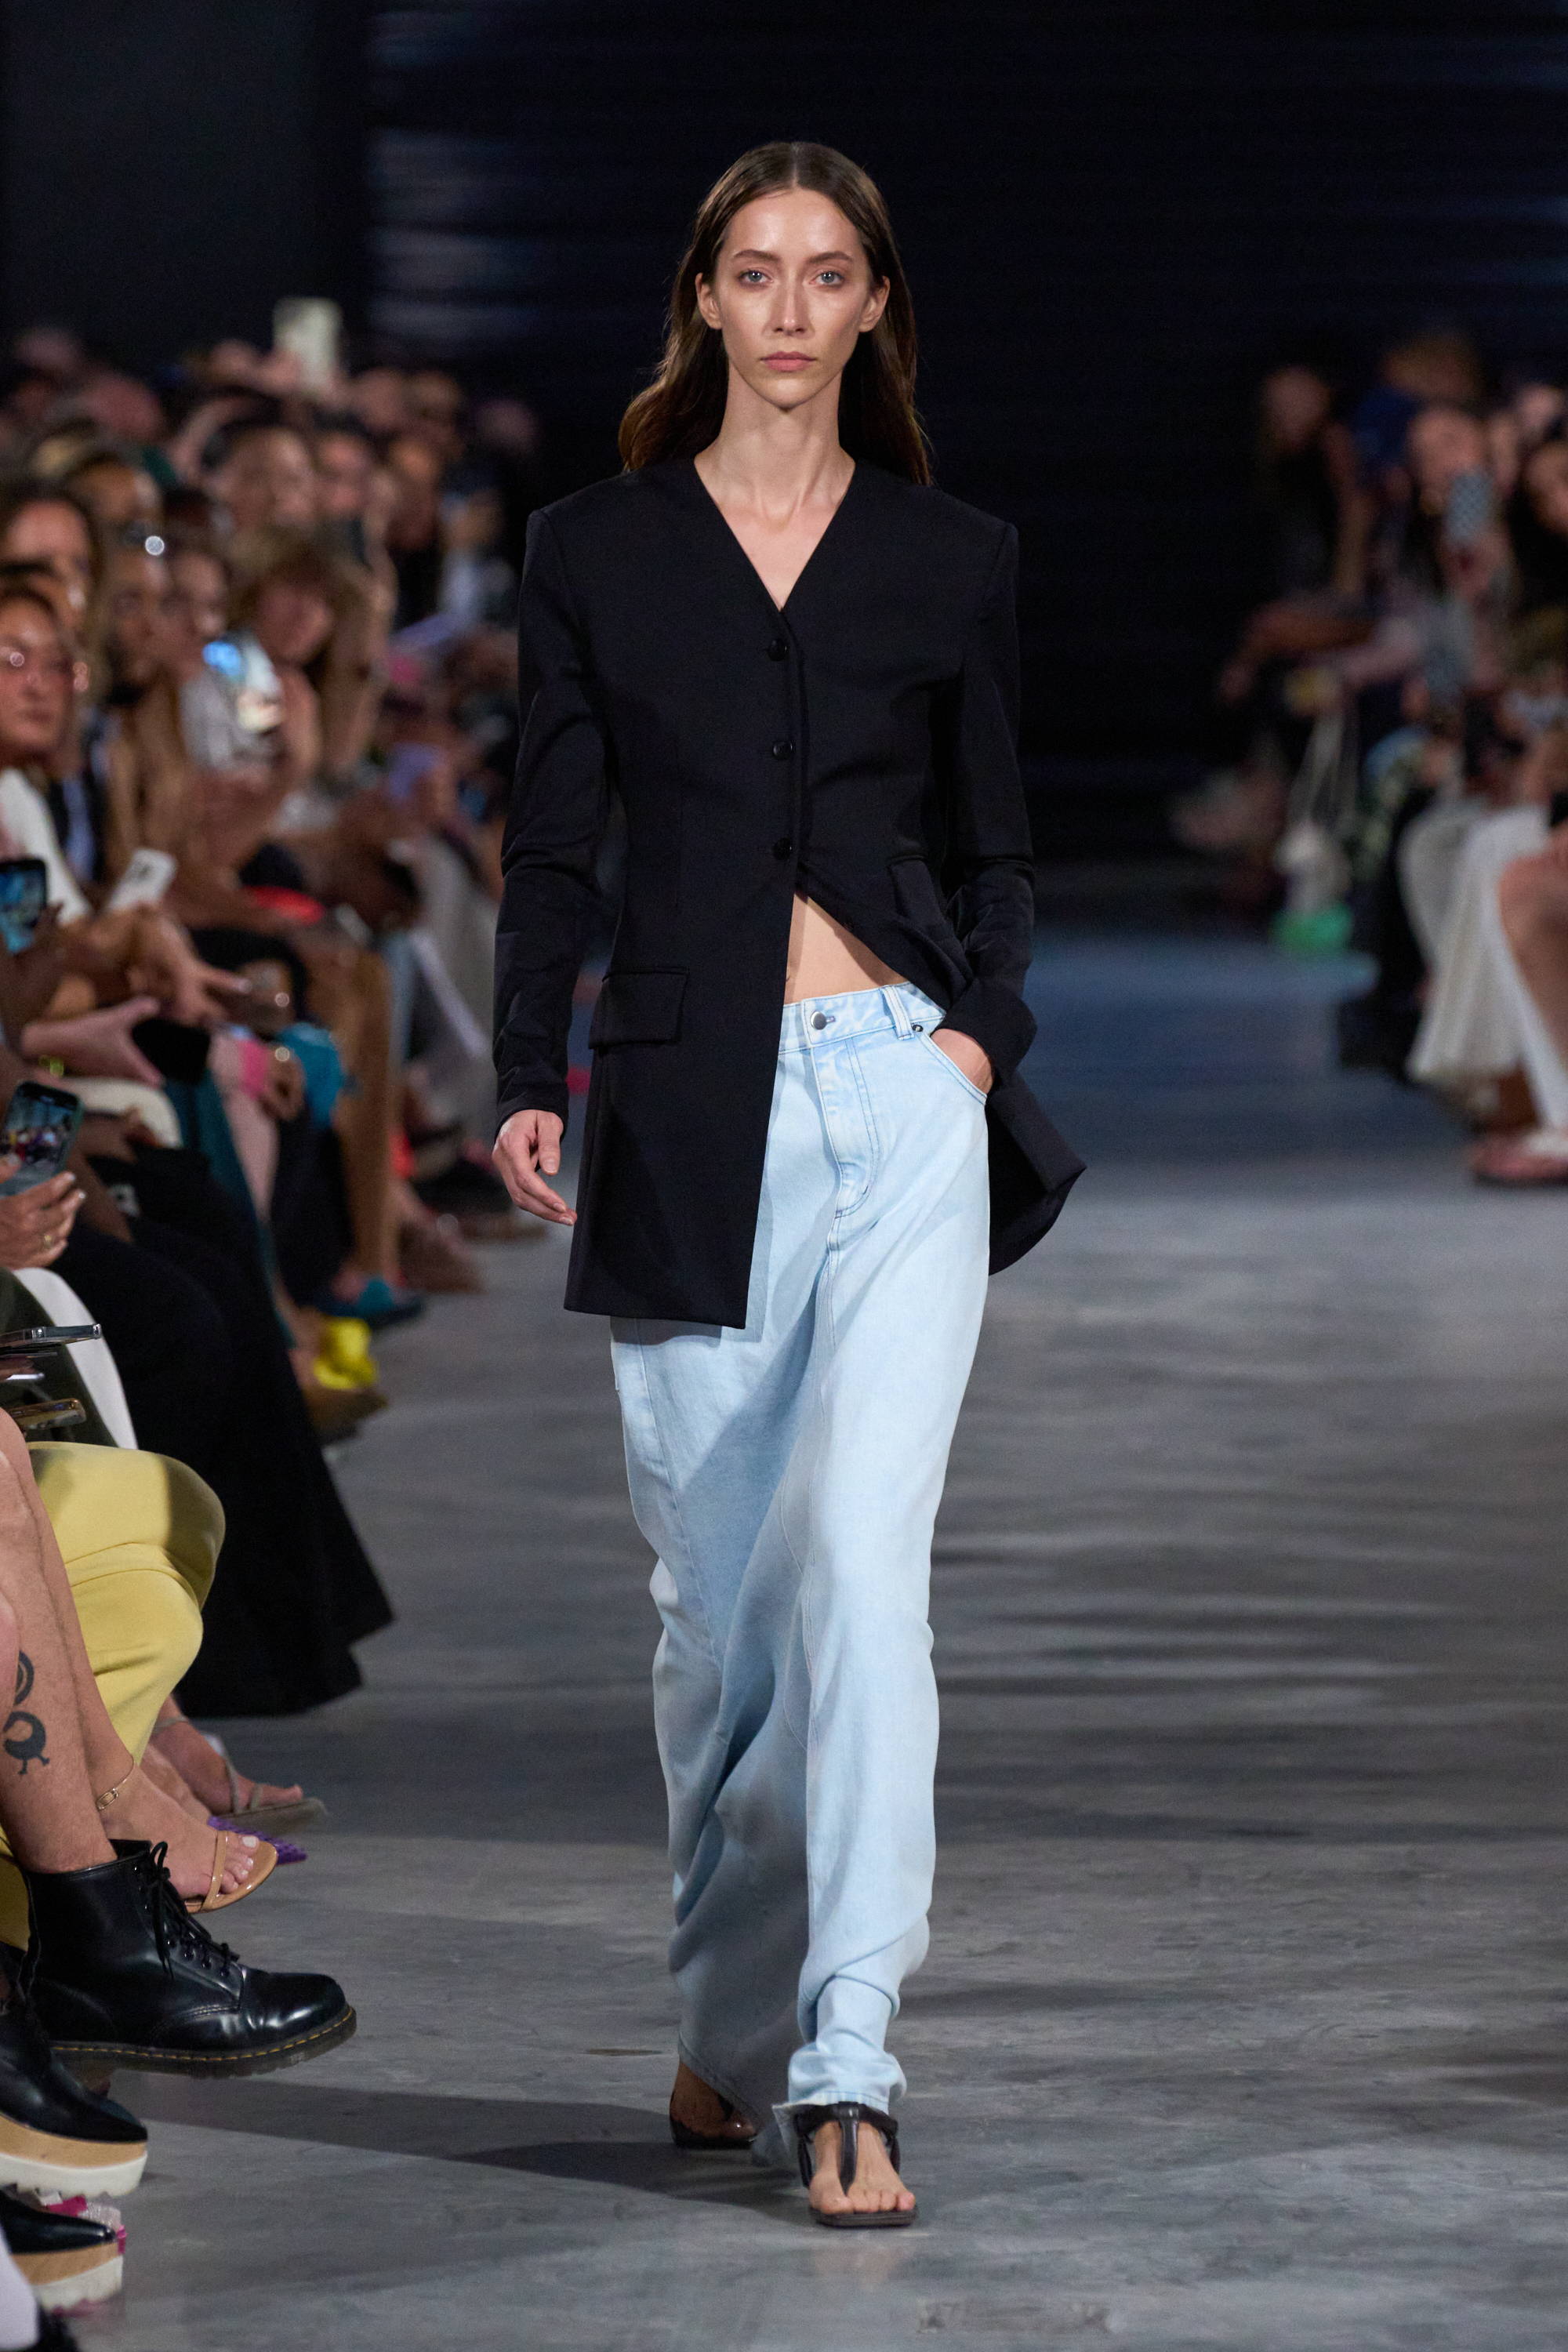 Model on a runway wearing a blazer and skirt